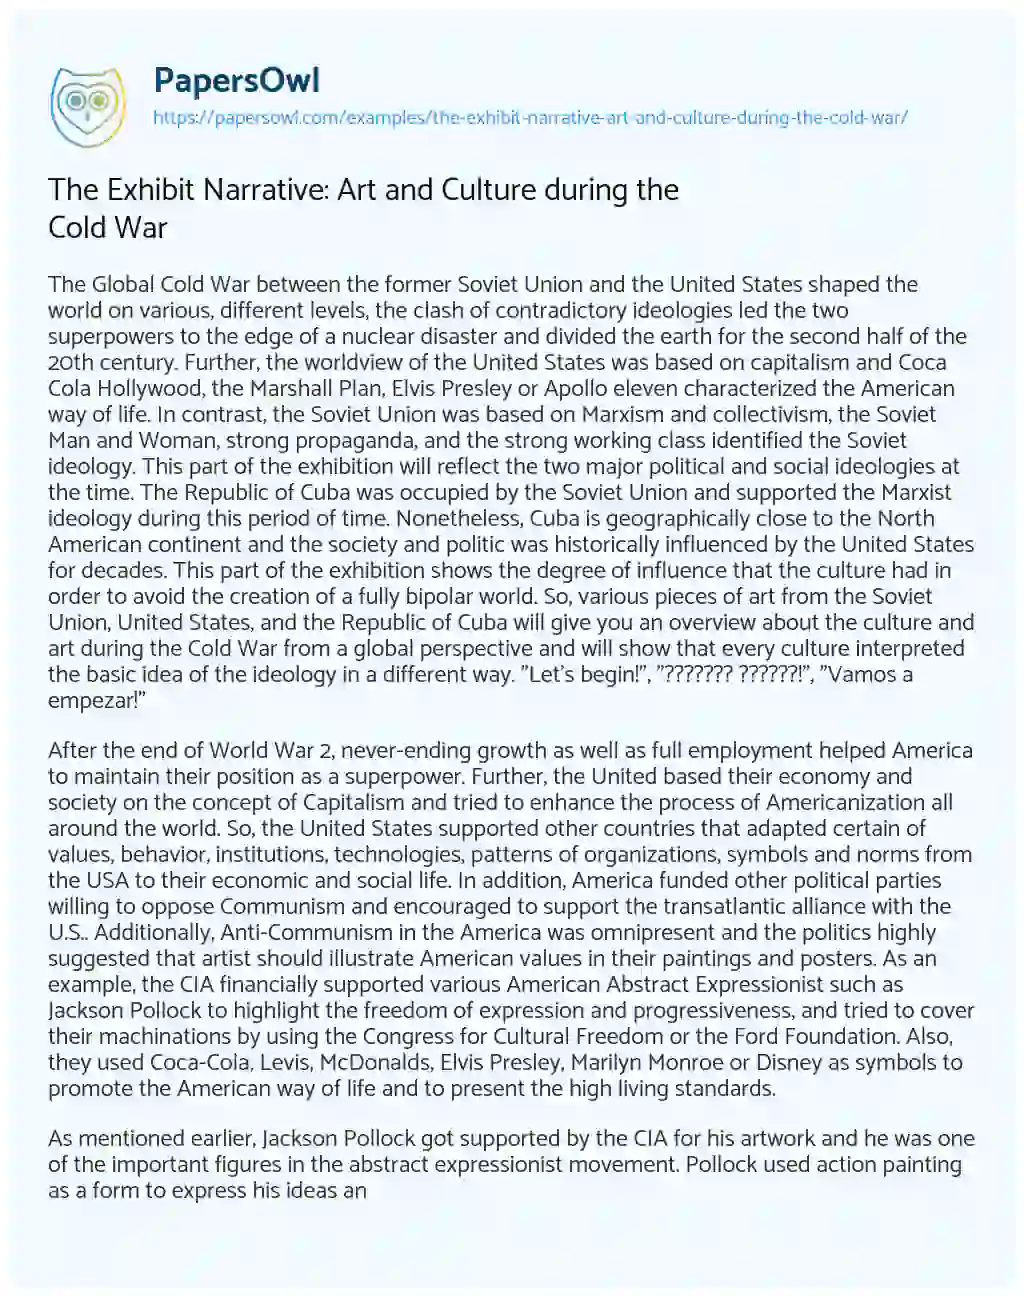 Essay on The Exhibit Narrative: Art and Culture during the Cold War